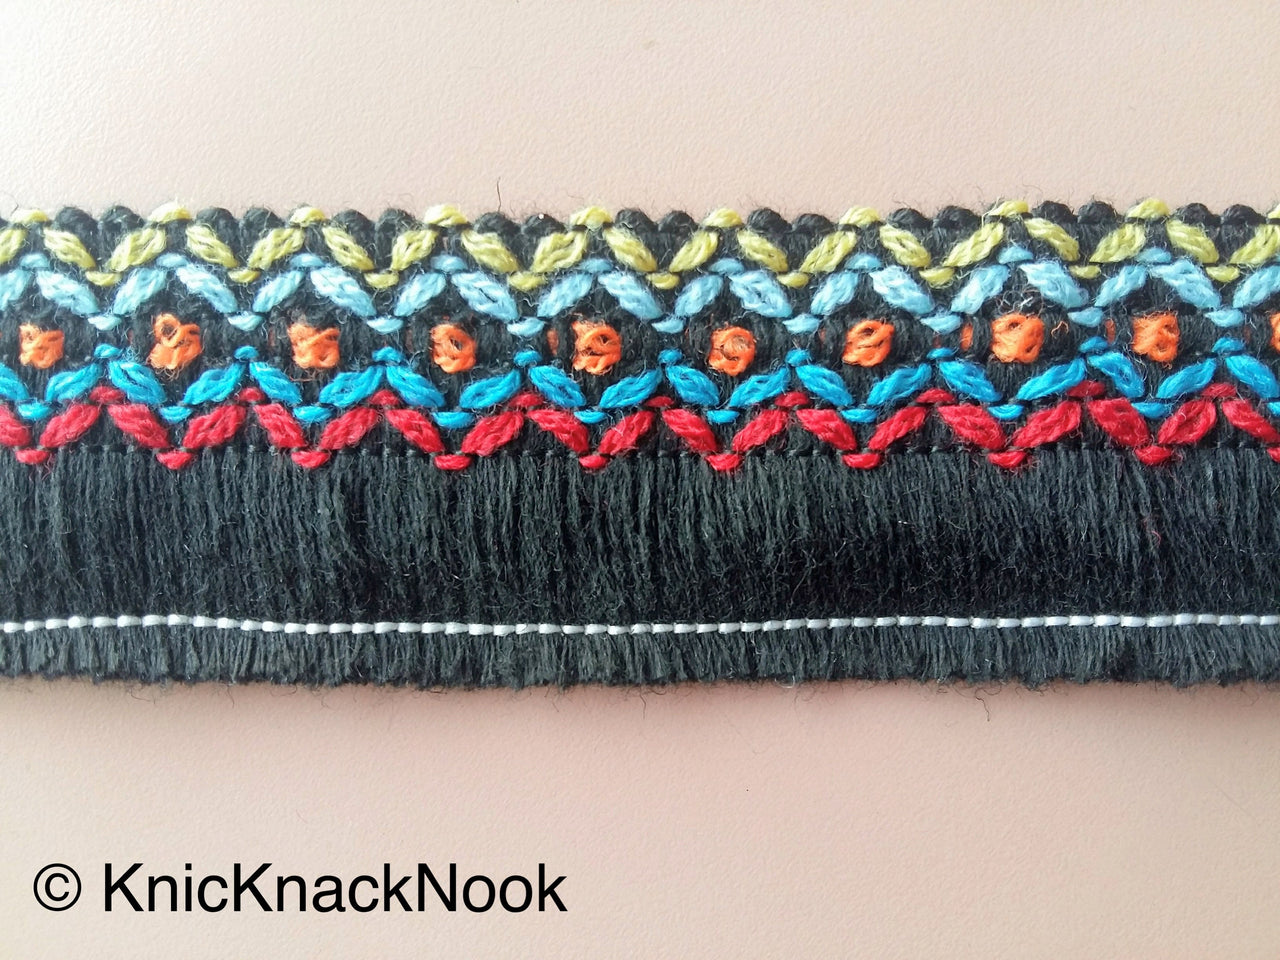 White / Black Threaded Trim With Red, Blue, Yellow And Orange Embroidery